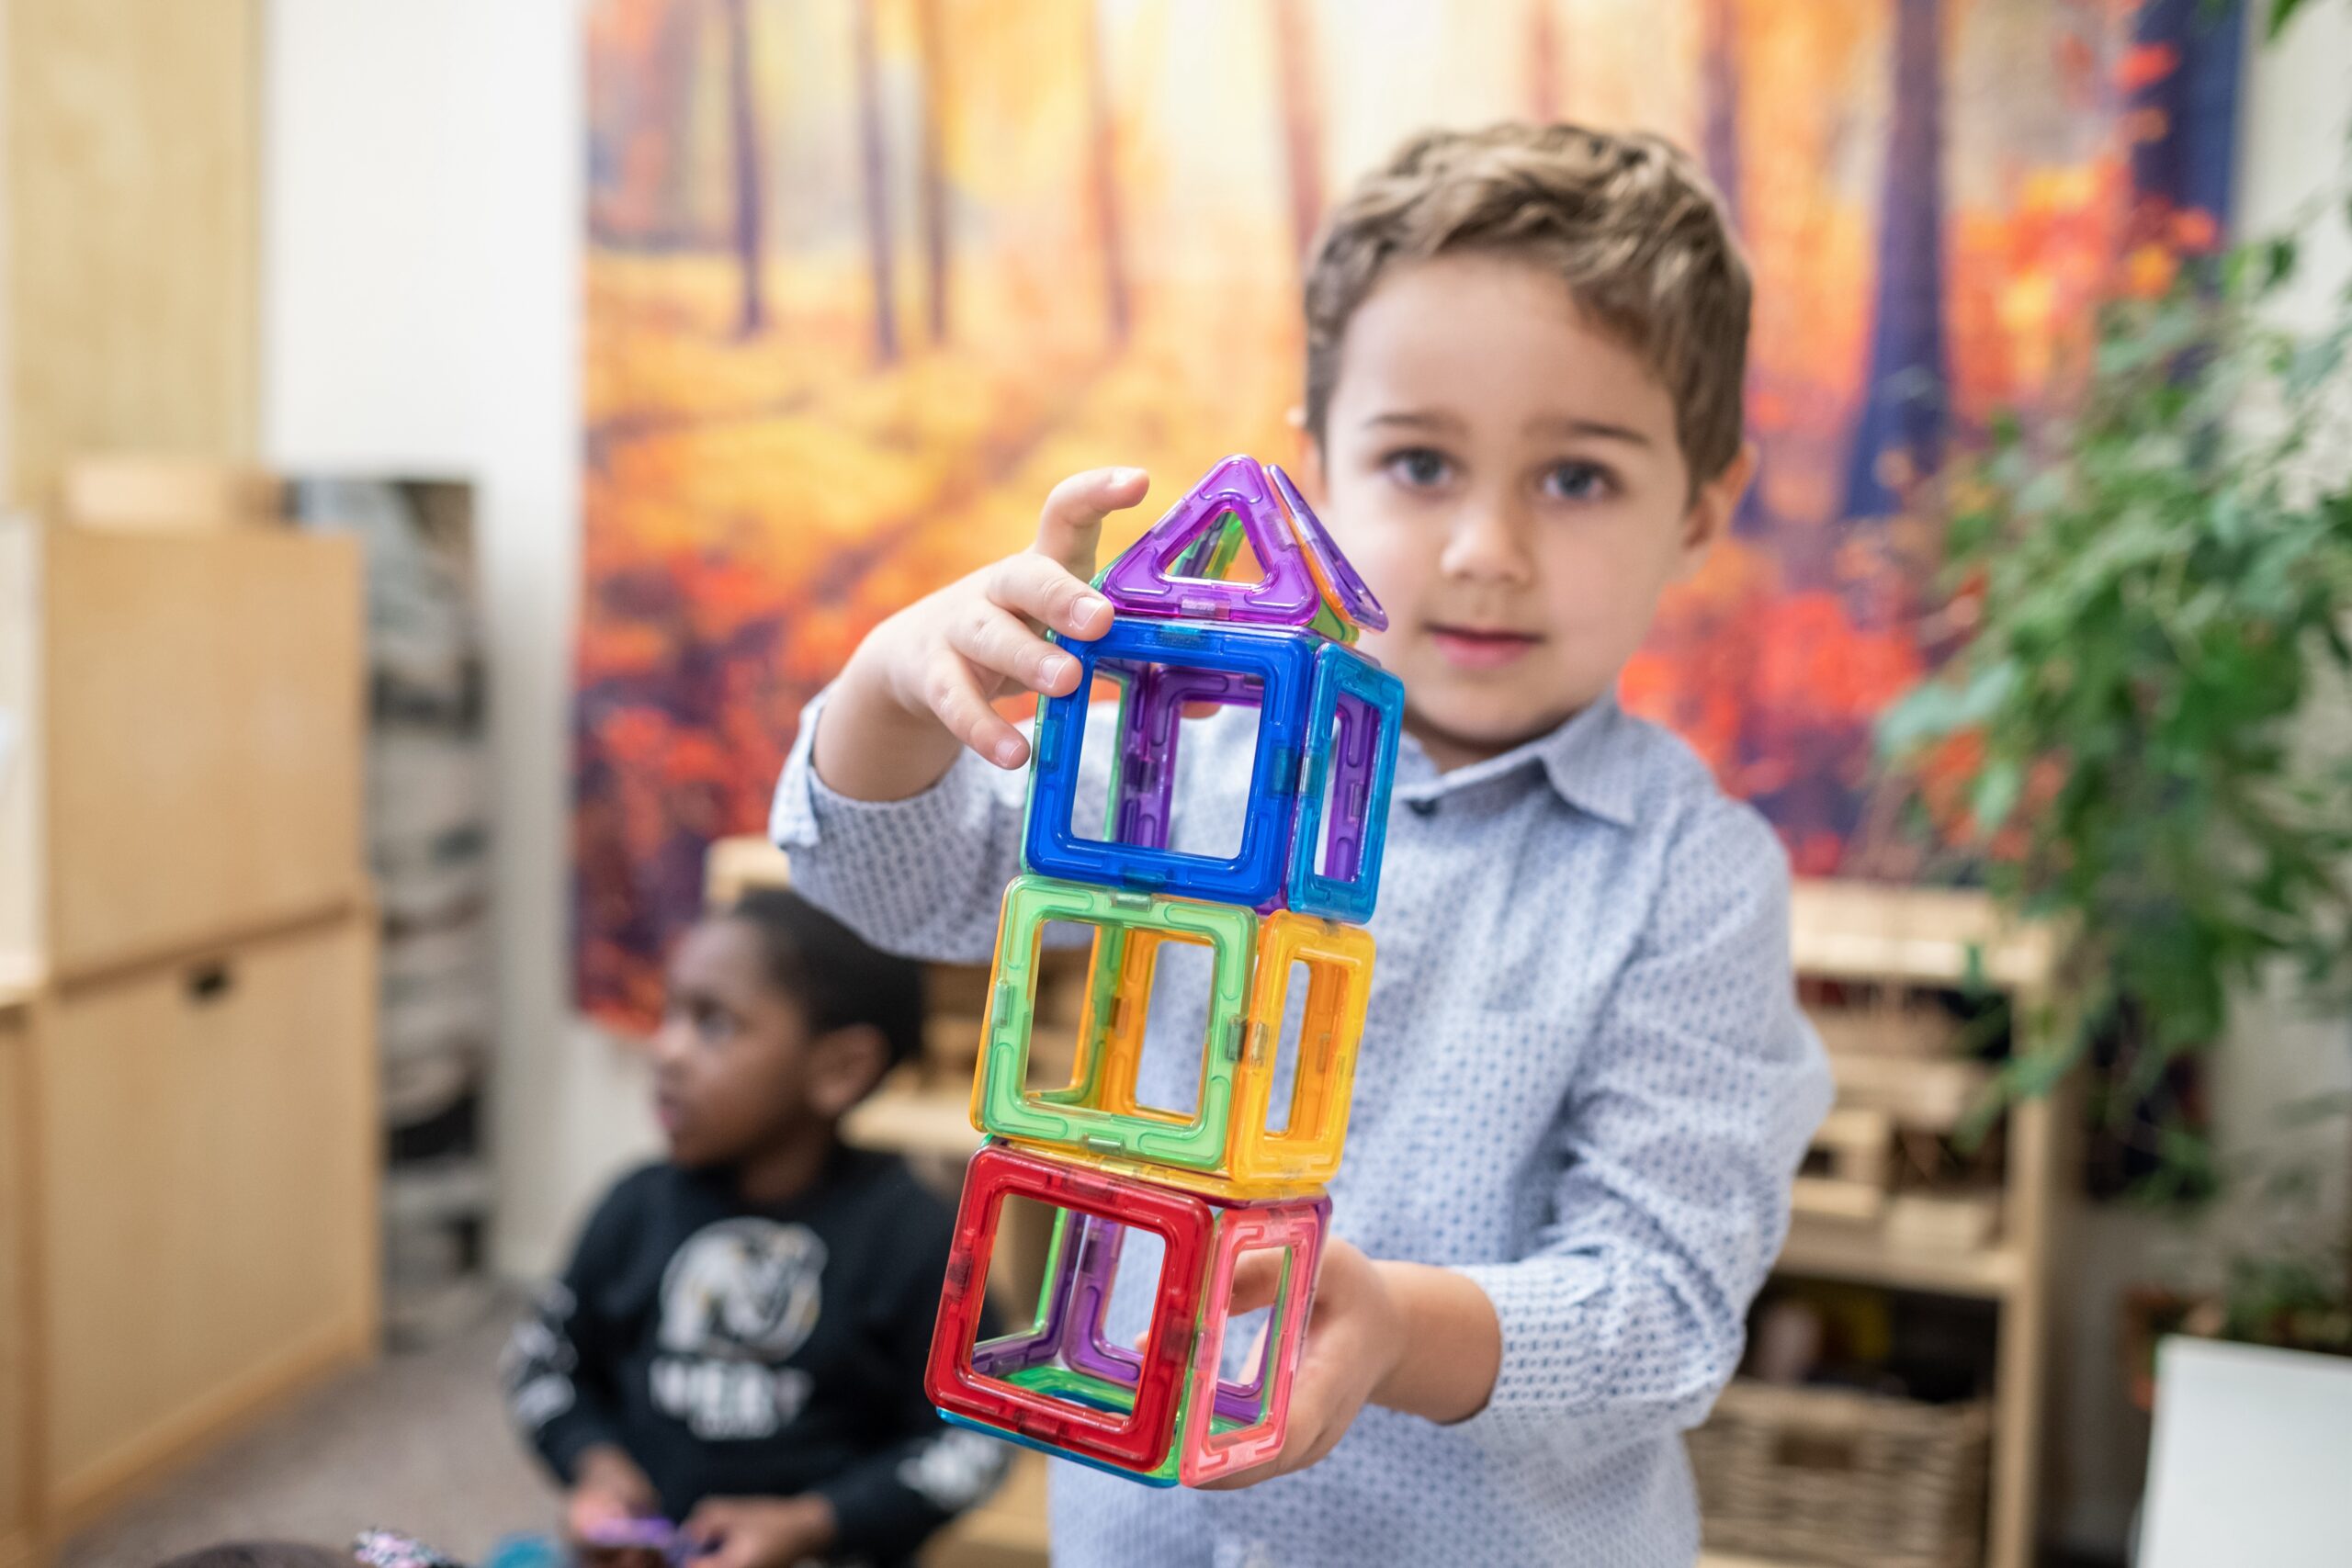 “If at first you don’t succeed”: An example of how early years practitioners encourage children to try again in mathematics learning interactions.